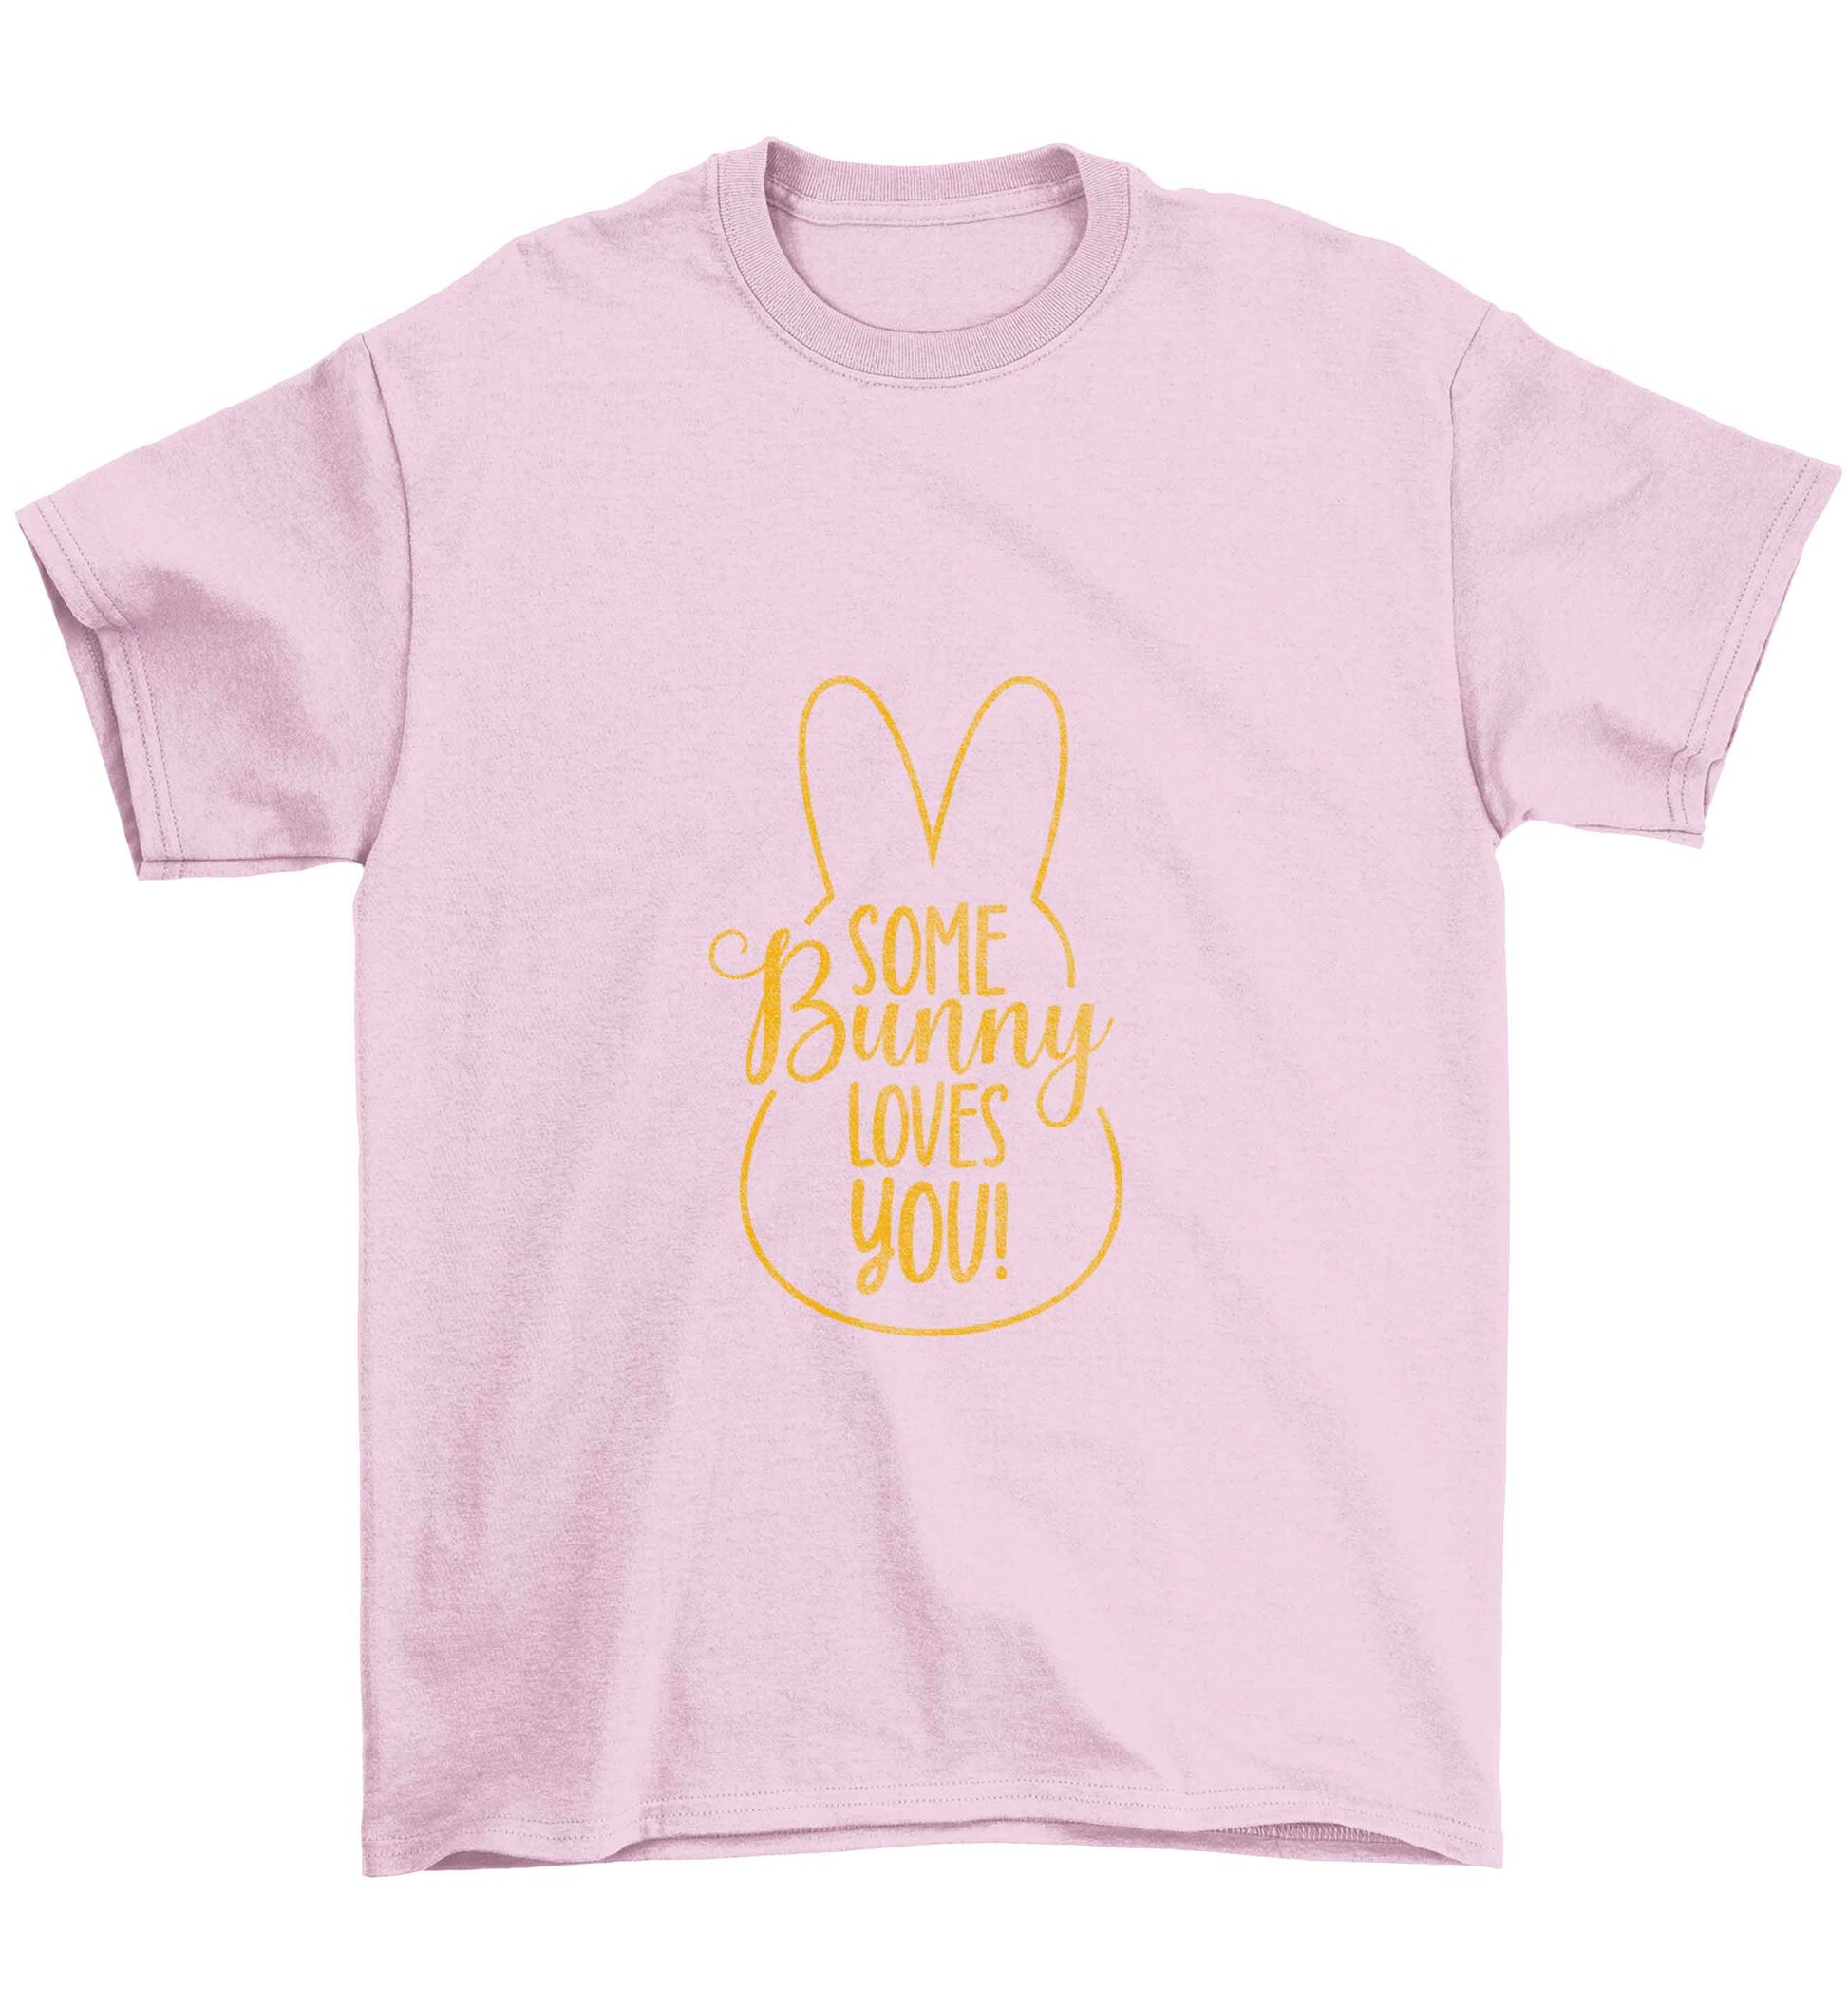 Some bunny loves you Children's light pink Tshirt 12-13 Years